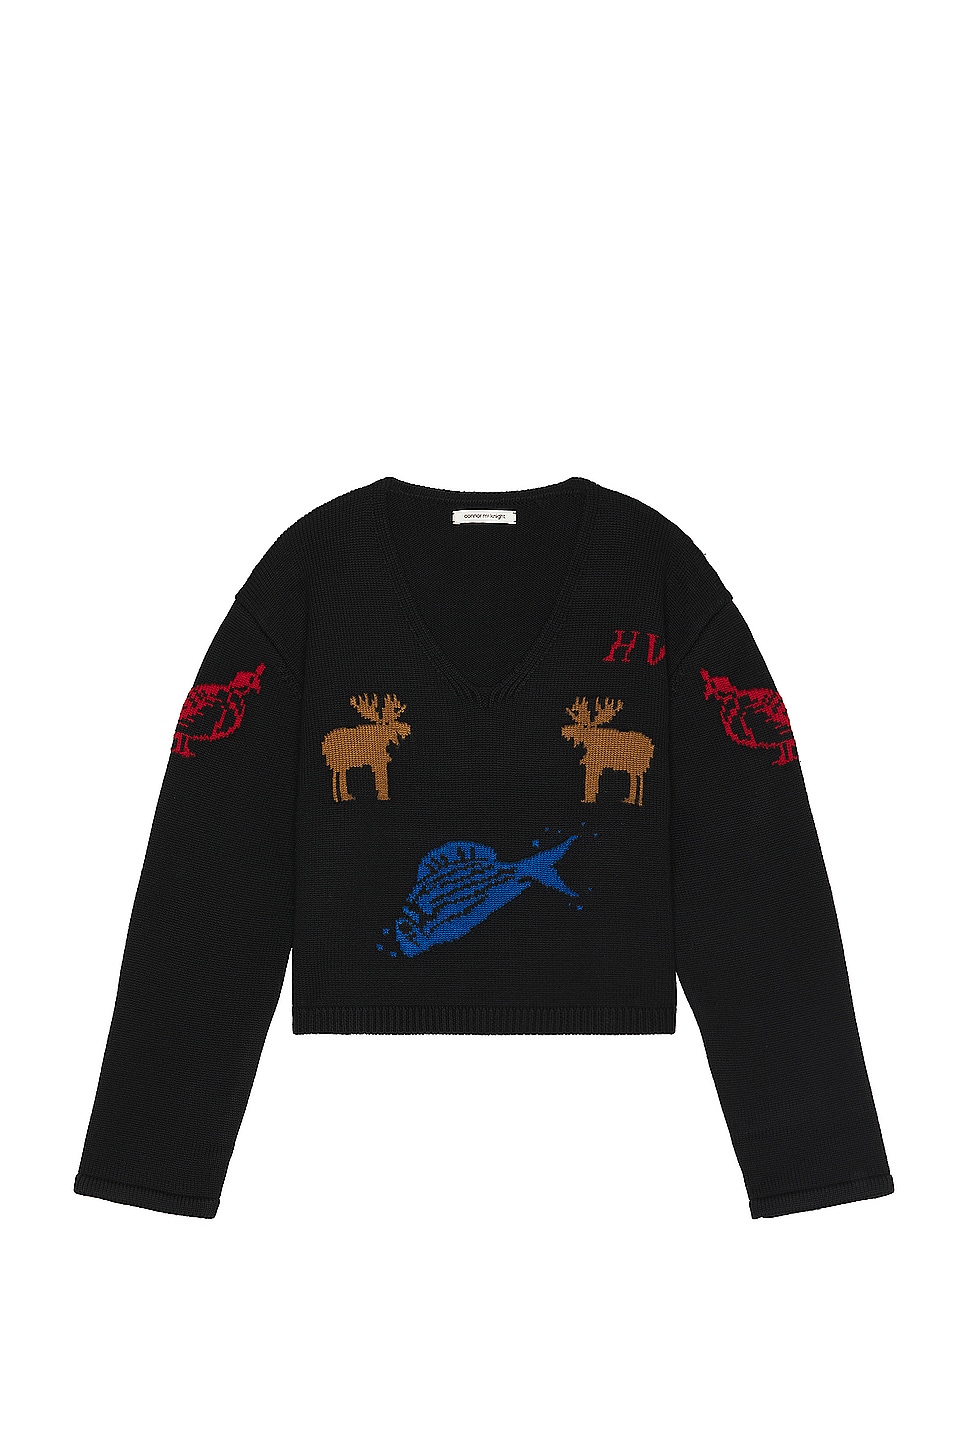 Fish & Game Hunting Sweater in Black